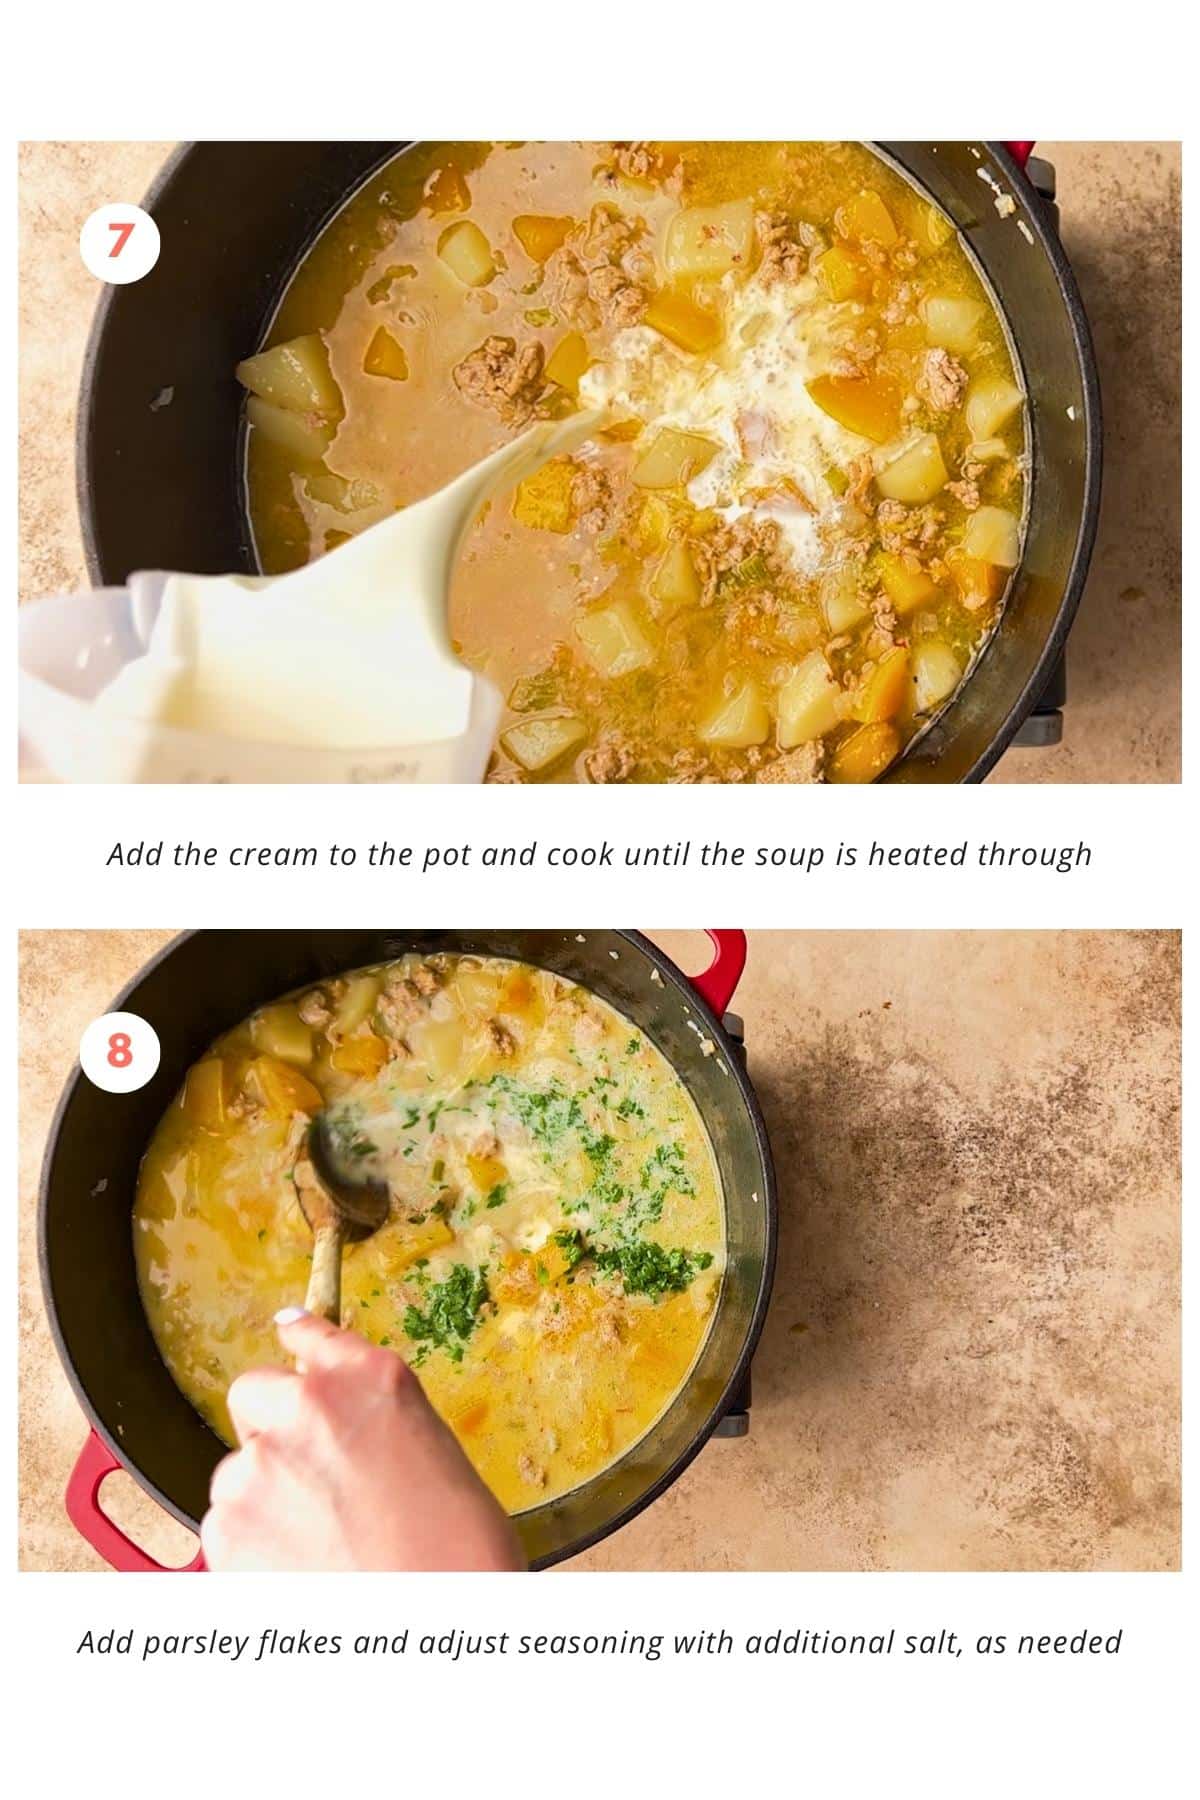 The cream is added to the pot of soup and cooked until heated through. Parsley flakes are added for additional flavor, and seasoning is adjusted with salt as needed.